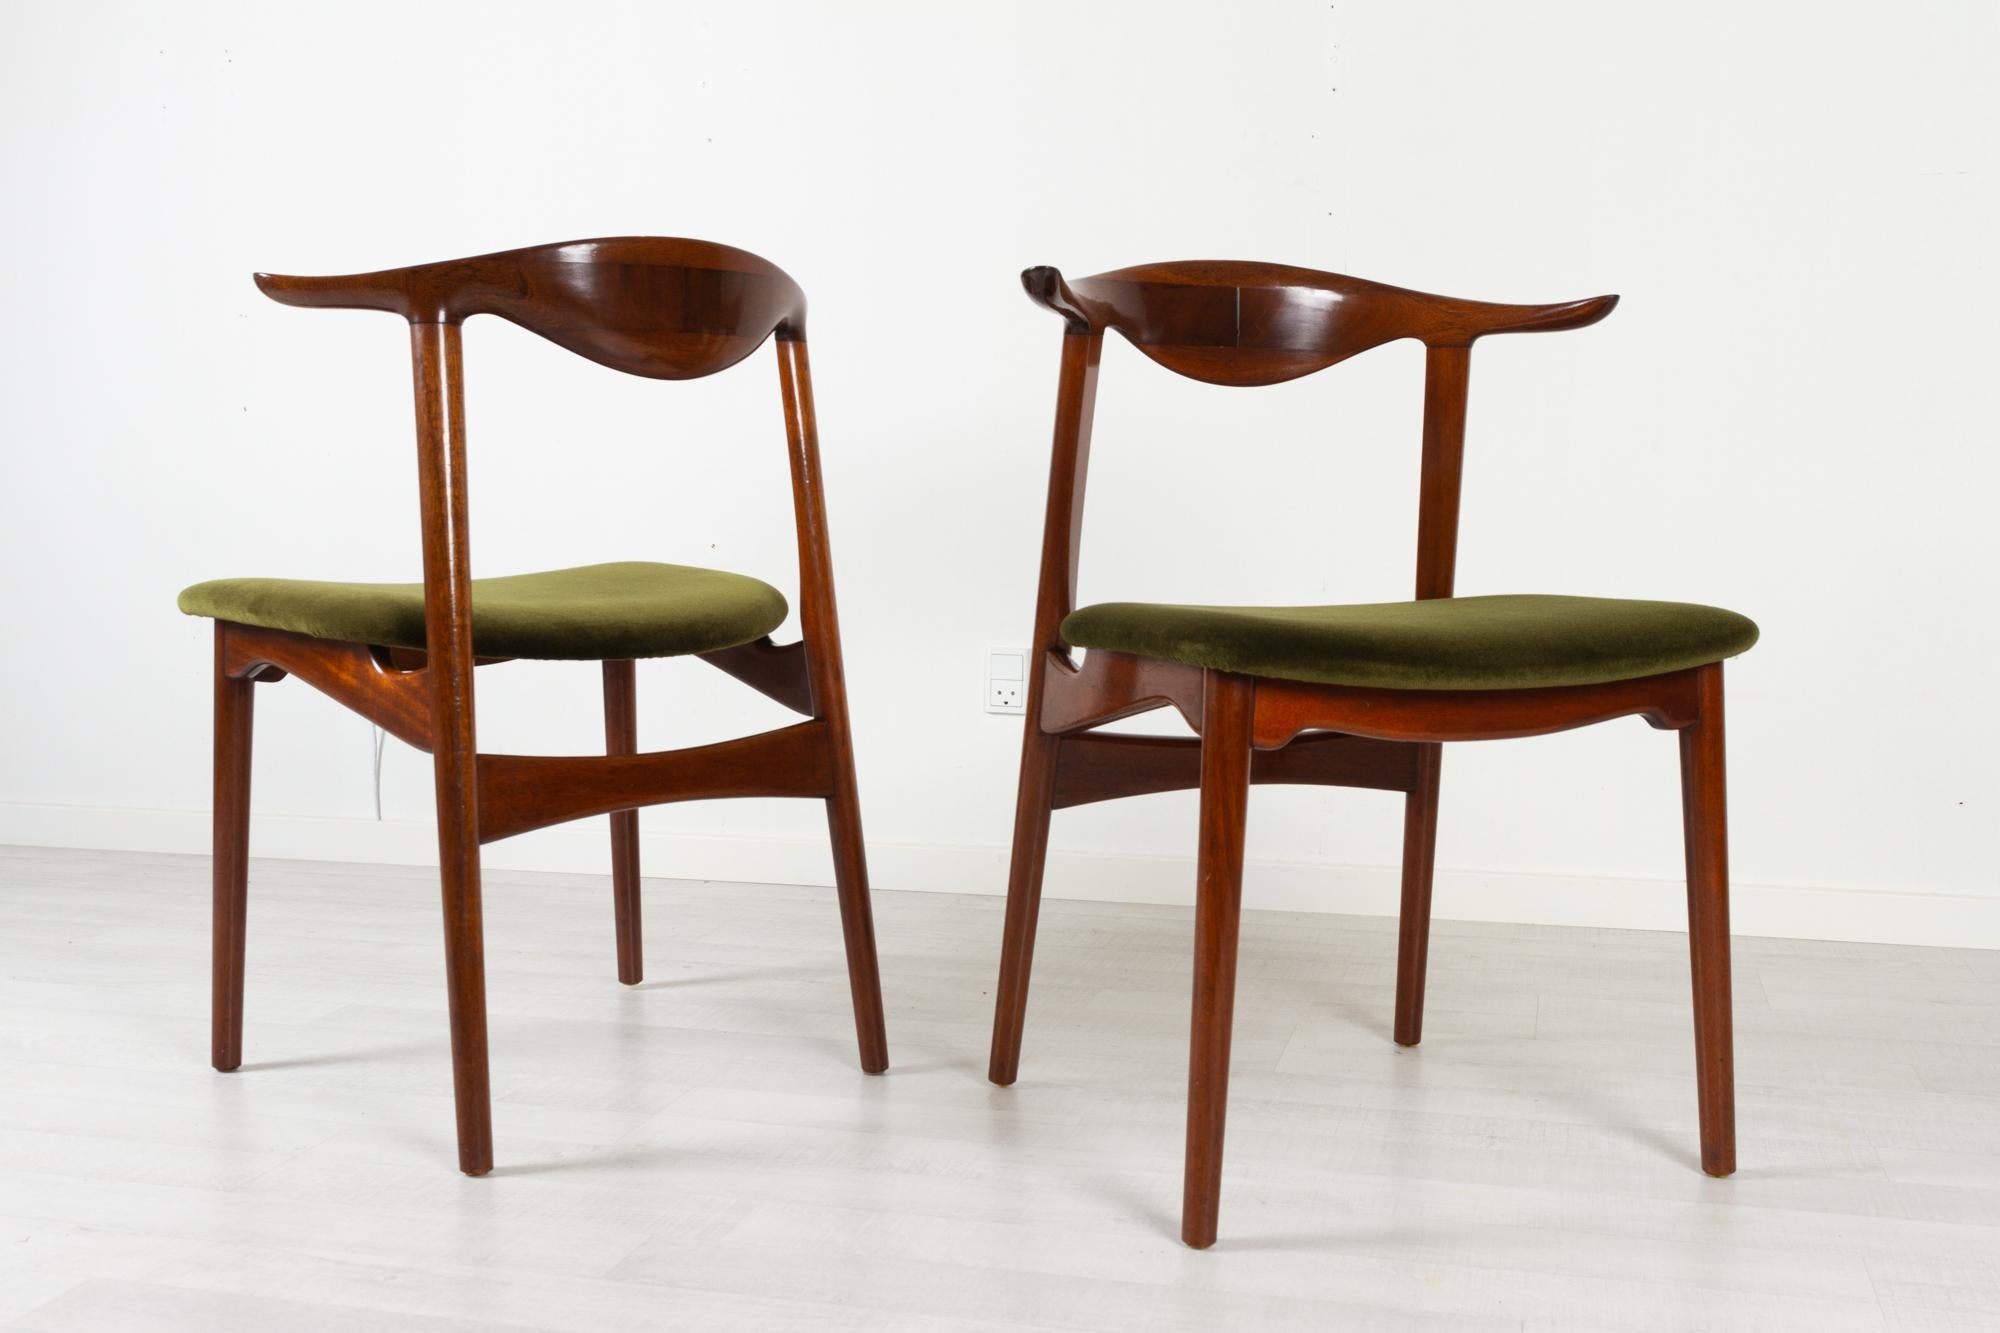 Vintage Danish Mahogany Cowhorn Chairs 1940s, Set of 6 For Sale 5